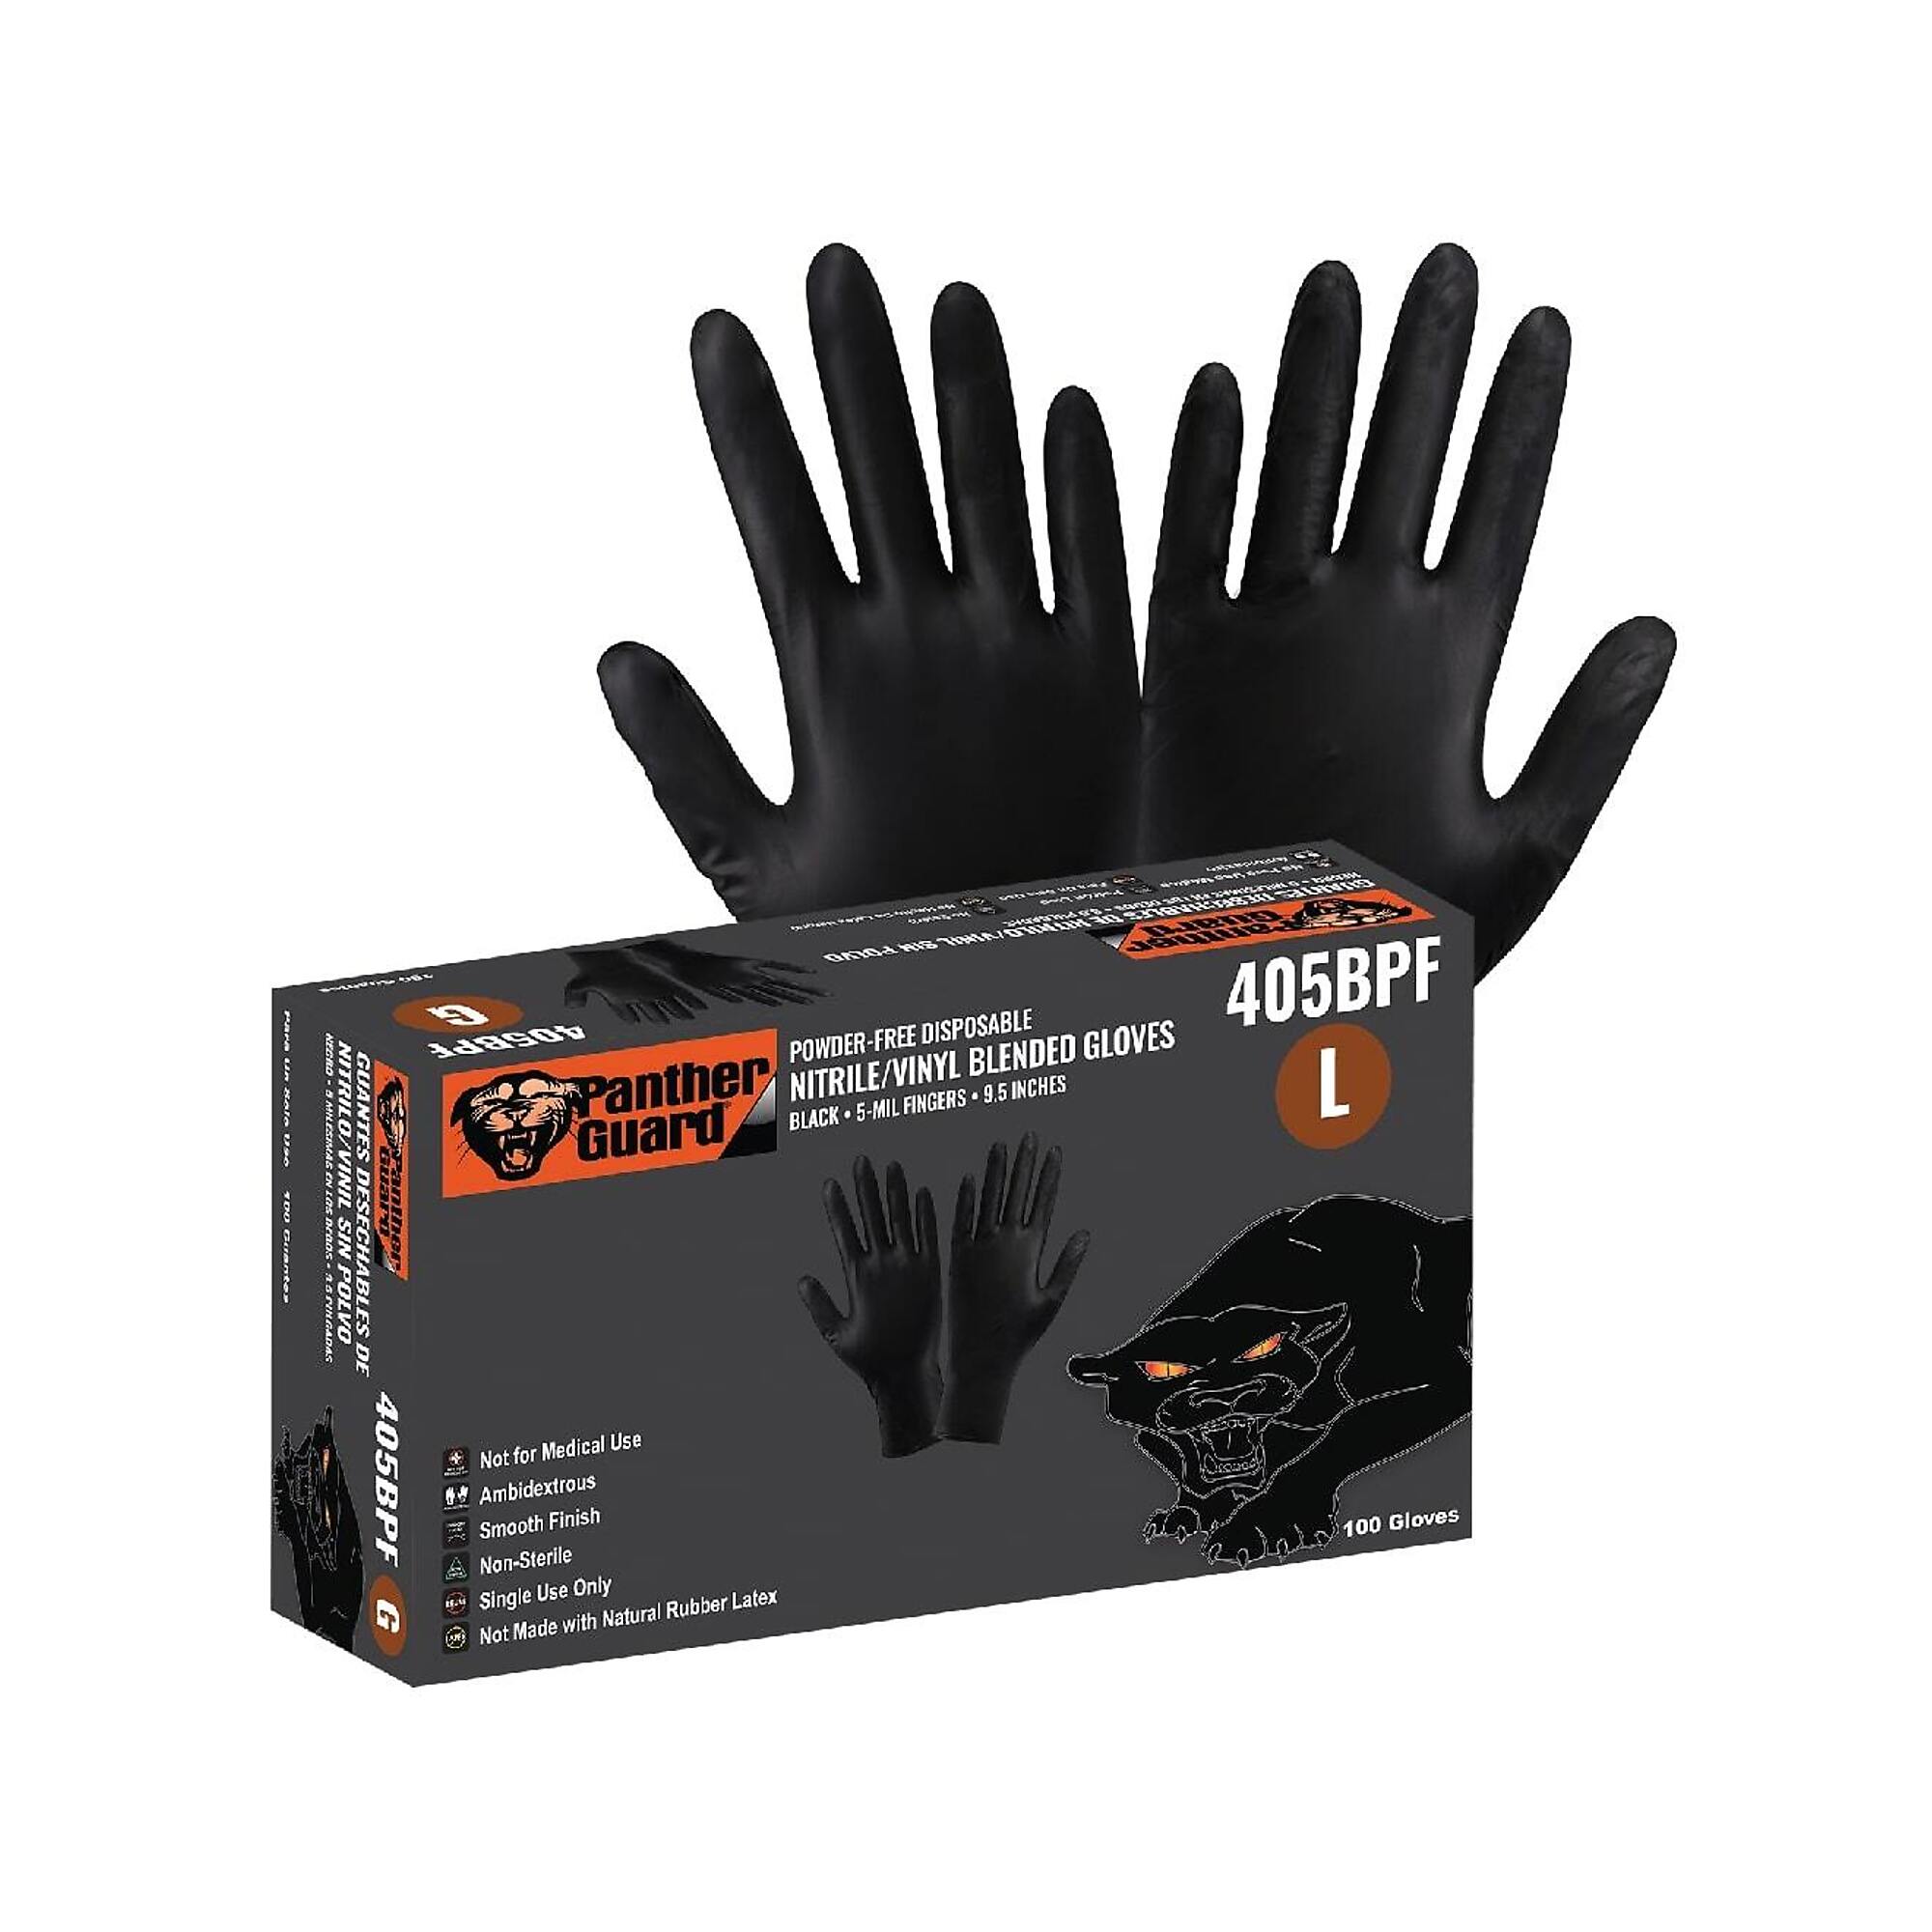 Global Glove Panther-Guard , 5-Mil, 9.5Inch, Black Nitrile/Vinyl, Smooth Finish - 500 Pairs, Size XL, Color Black, Included (qty.) 1000 Model 405BPF-